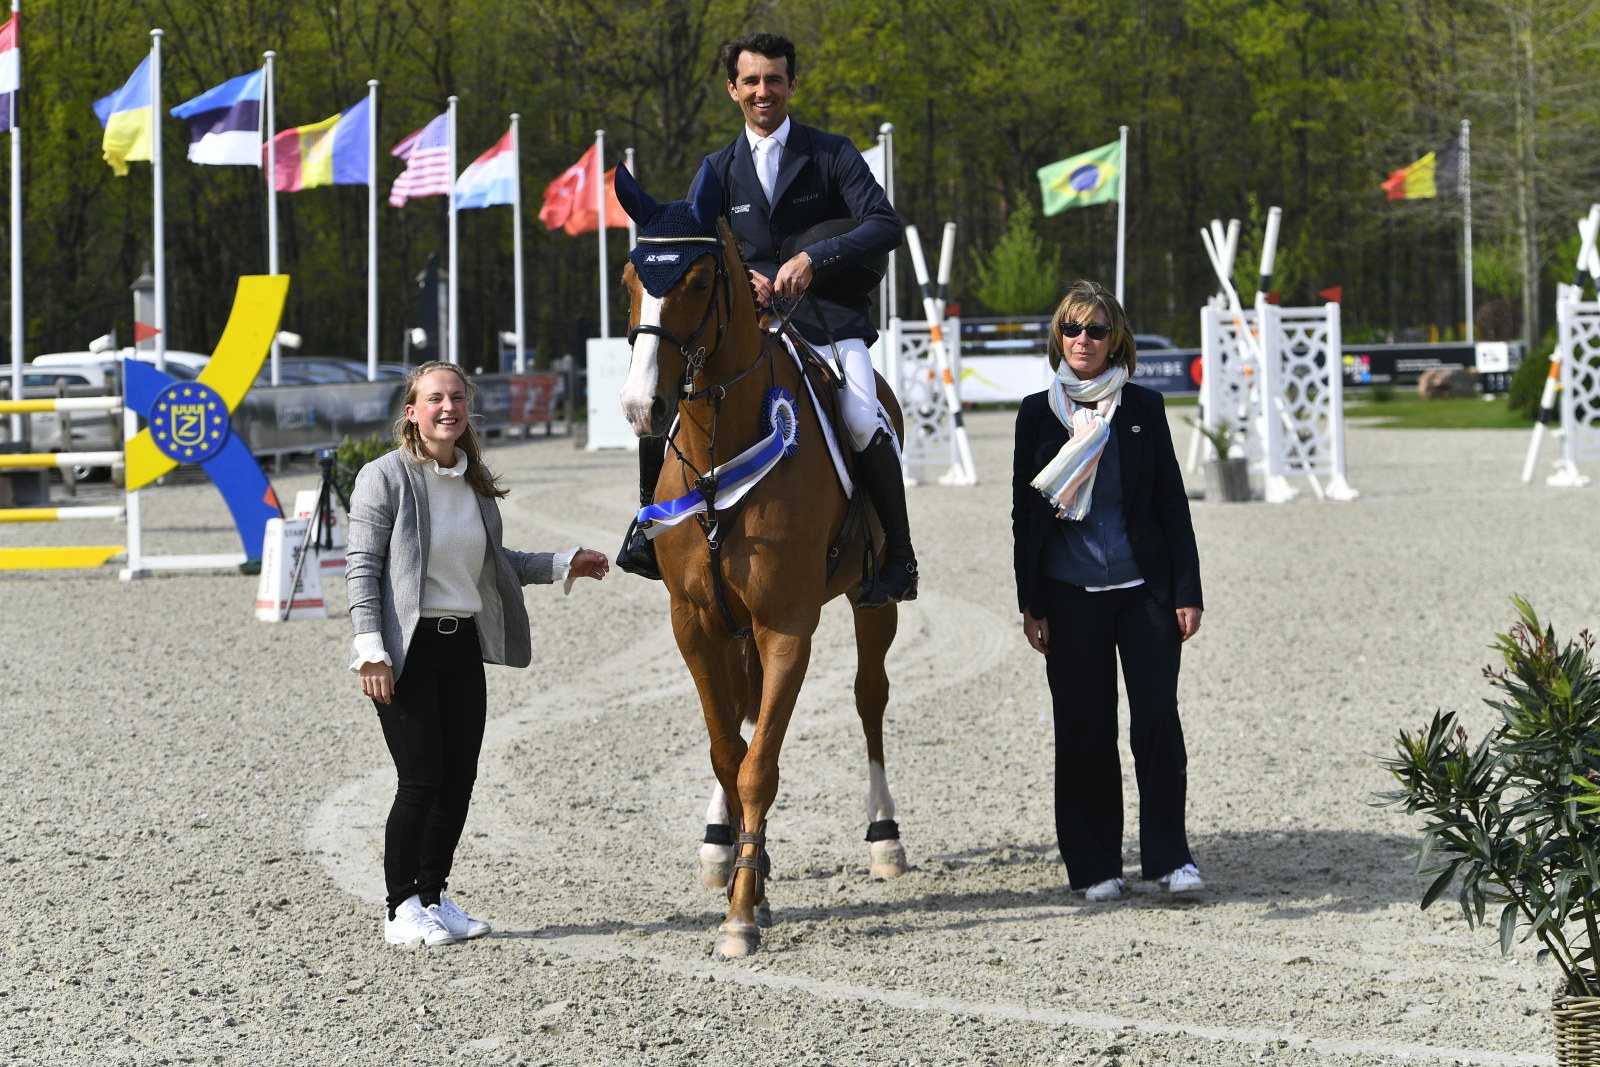 2nd place Napoleon van den Dael and Marlon Zanotelli in the 1.45m Grand Prix at Sentower Park!